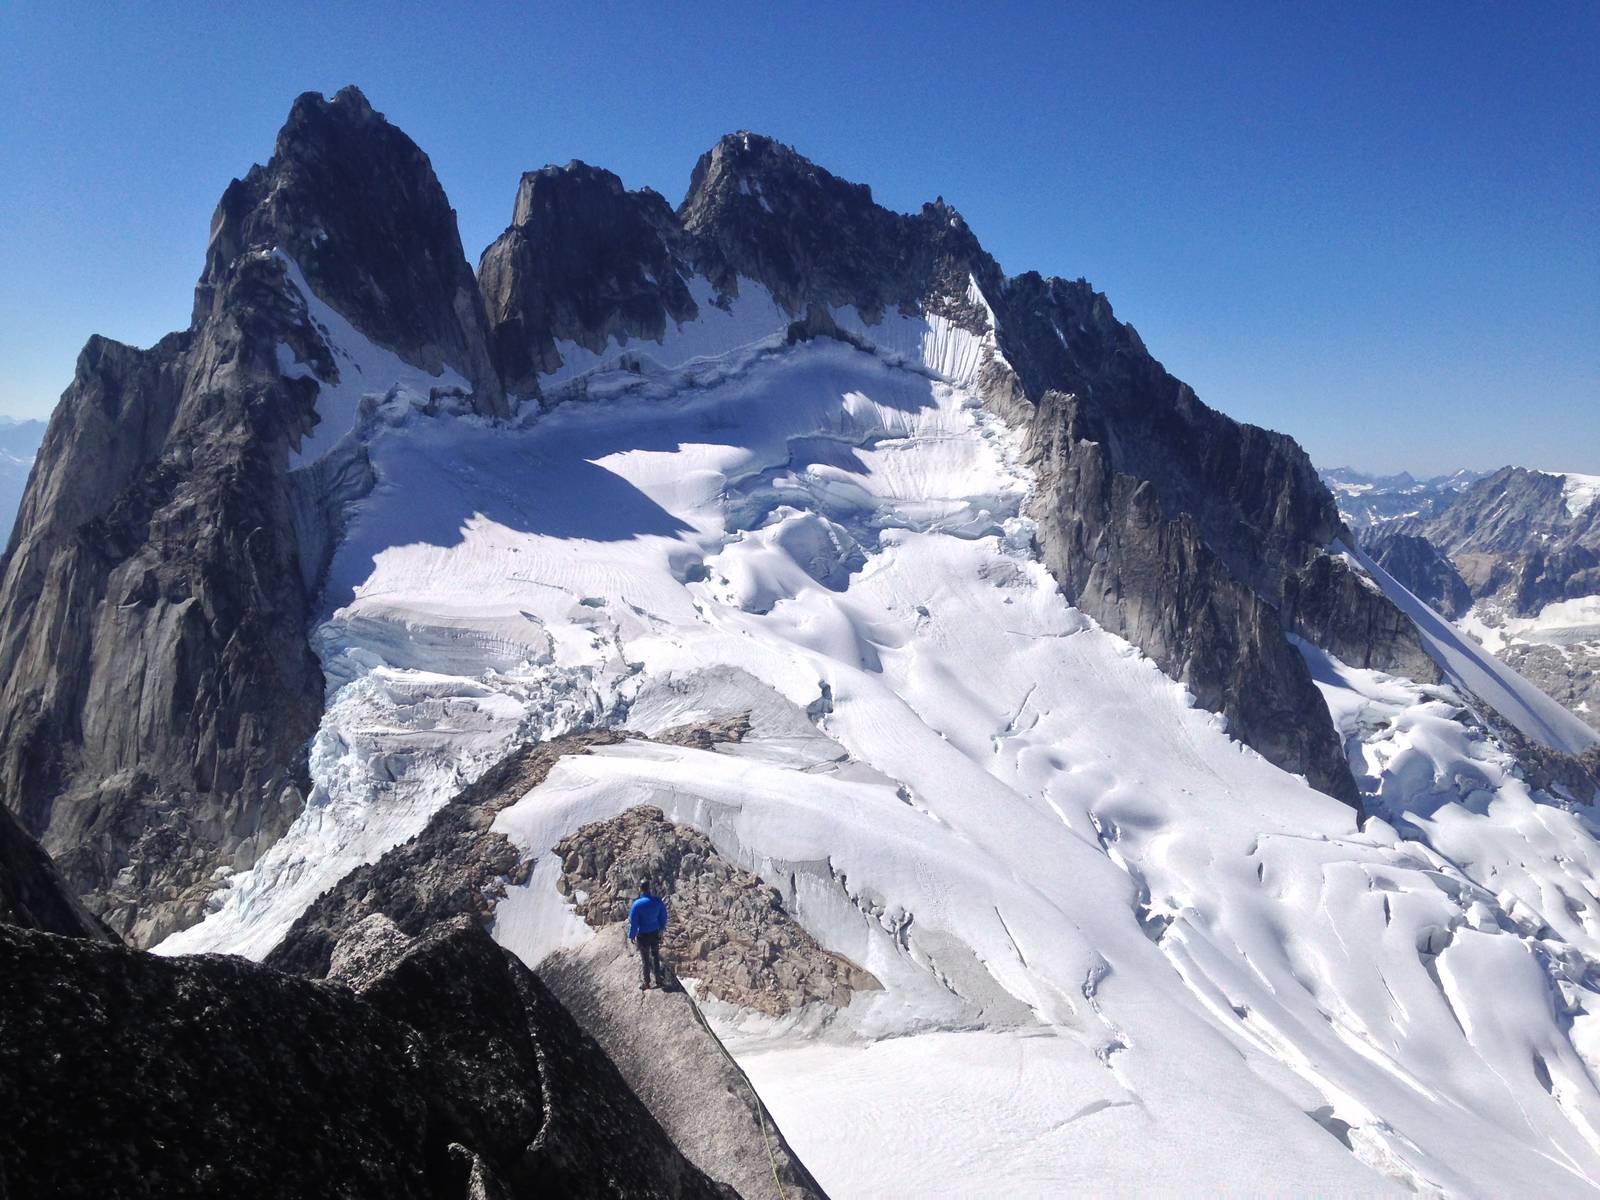 Humbling sites (and scary ridges) in the Bugaboos